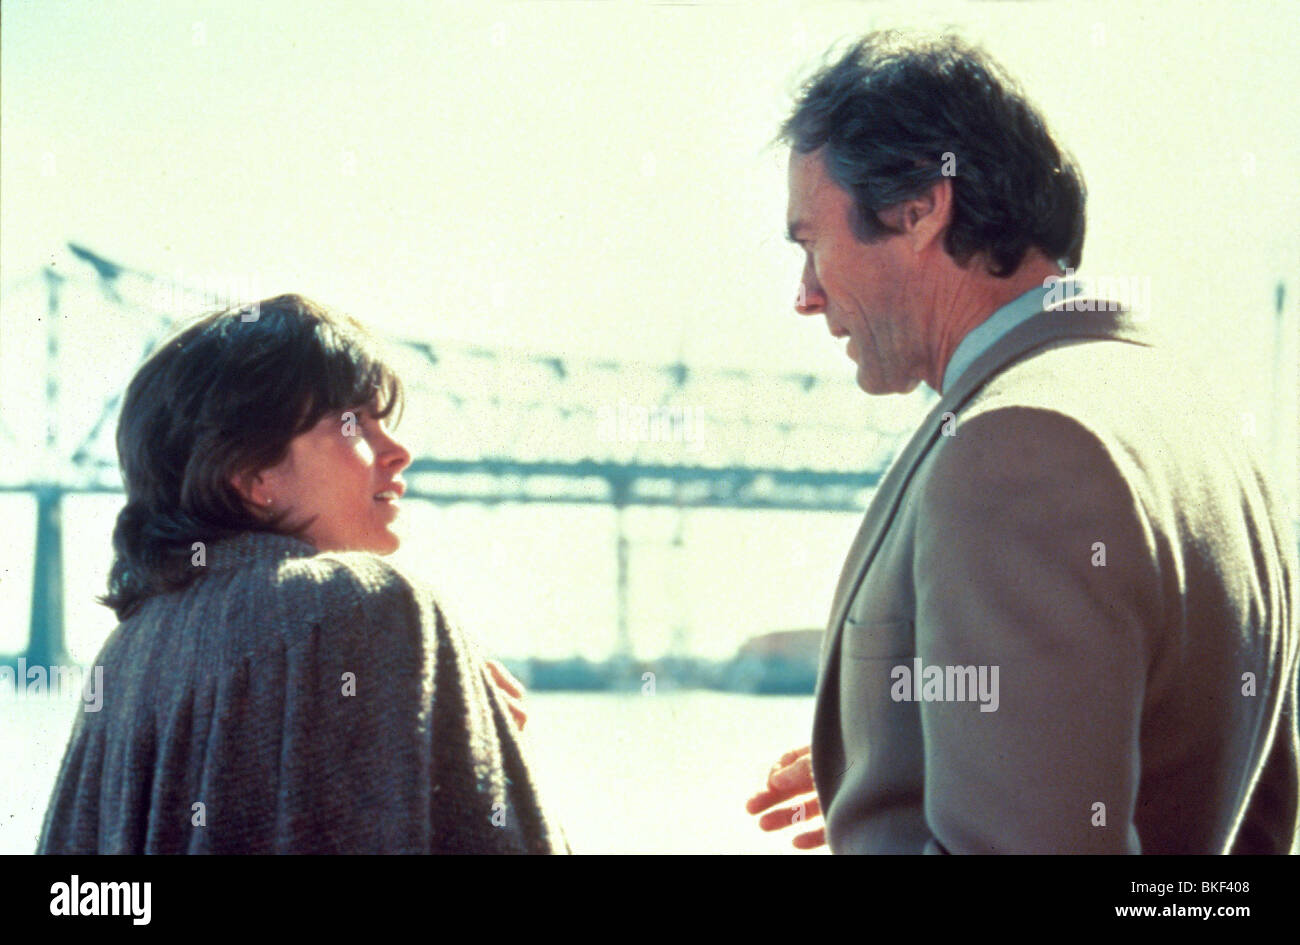 TIGHTROPE (1984) GENEVIEVE BUJOLD, CLINT EASTWOOD TGR 018 Stock Photo